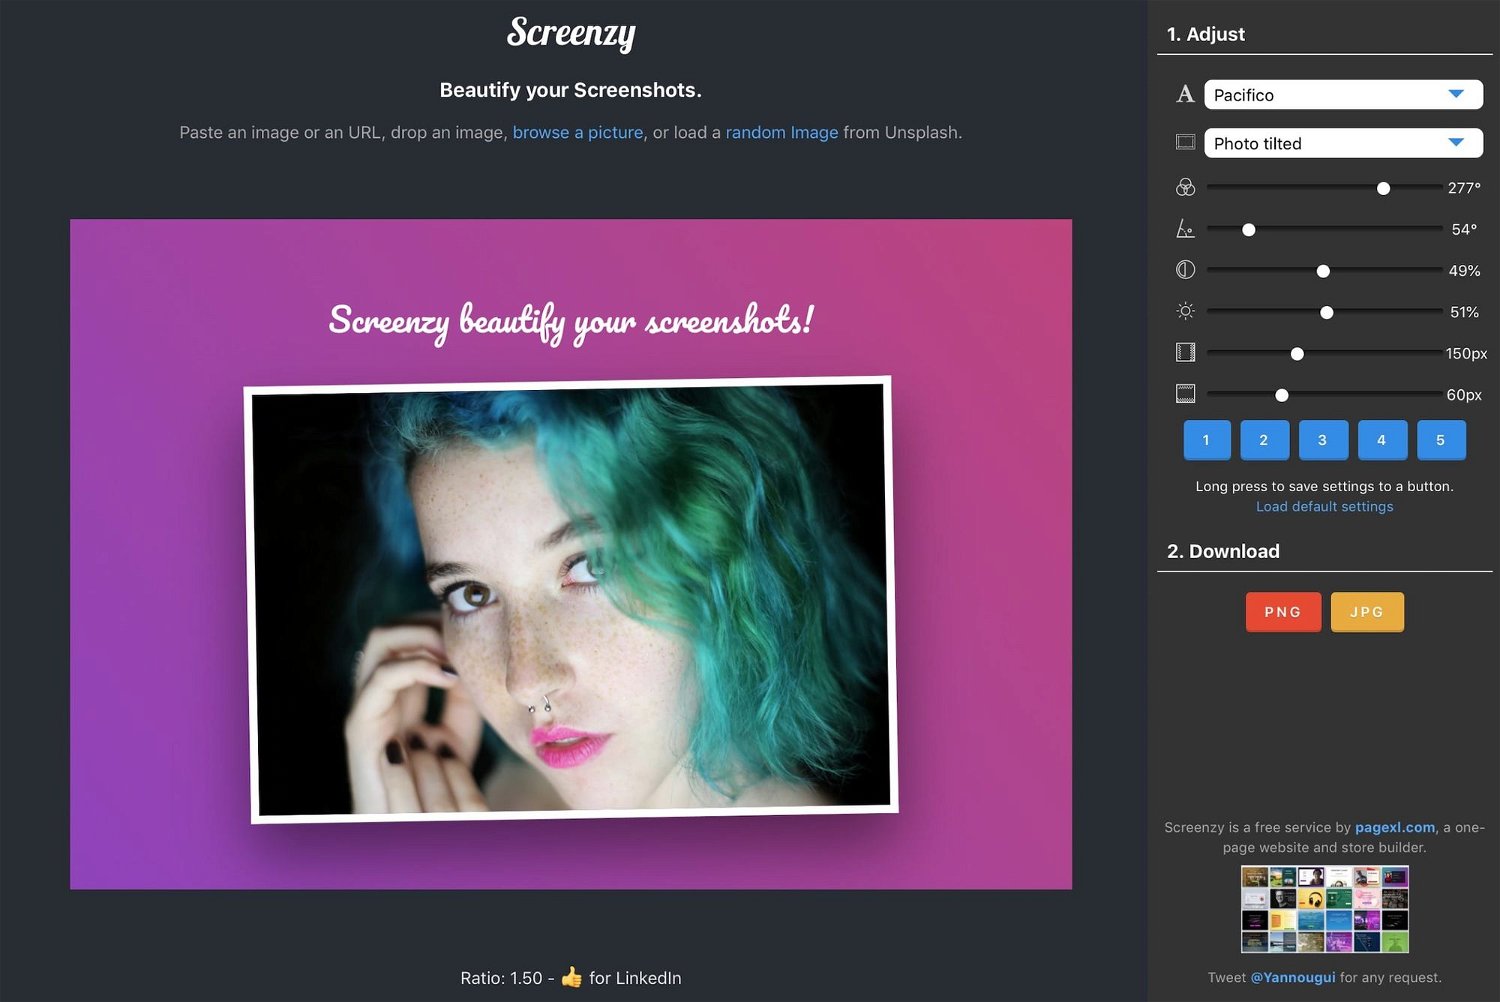 Screenzy - Pictures and Screenshots Beautifier